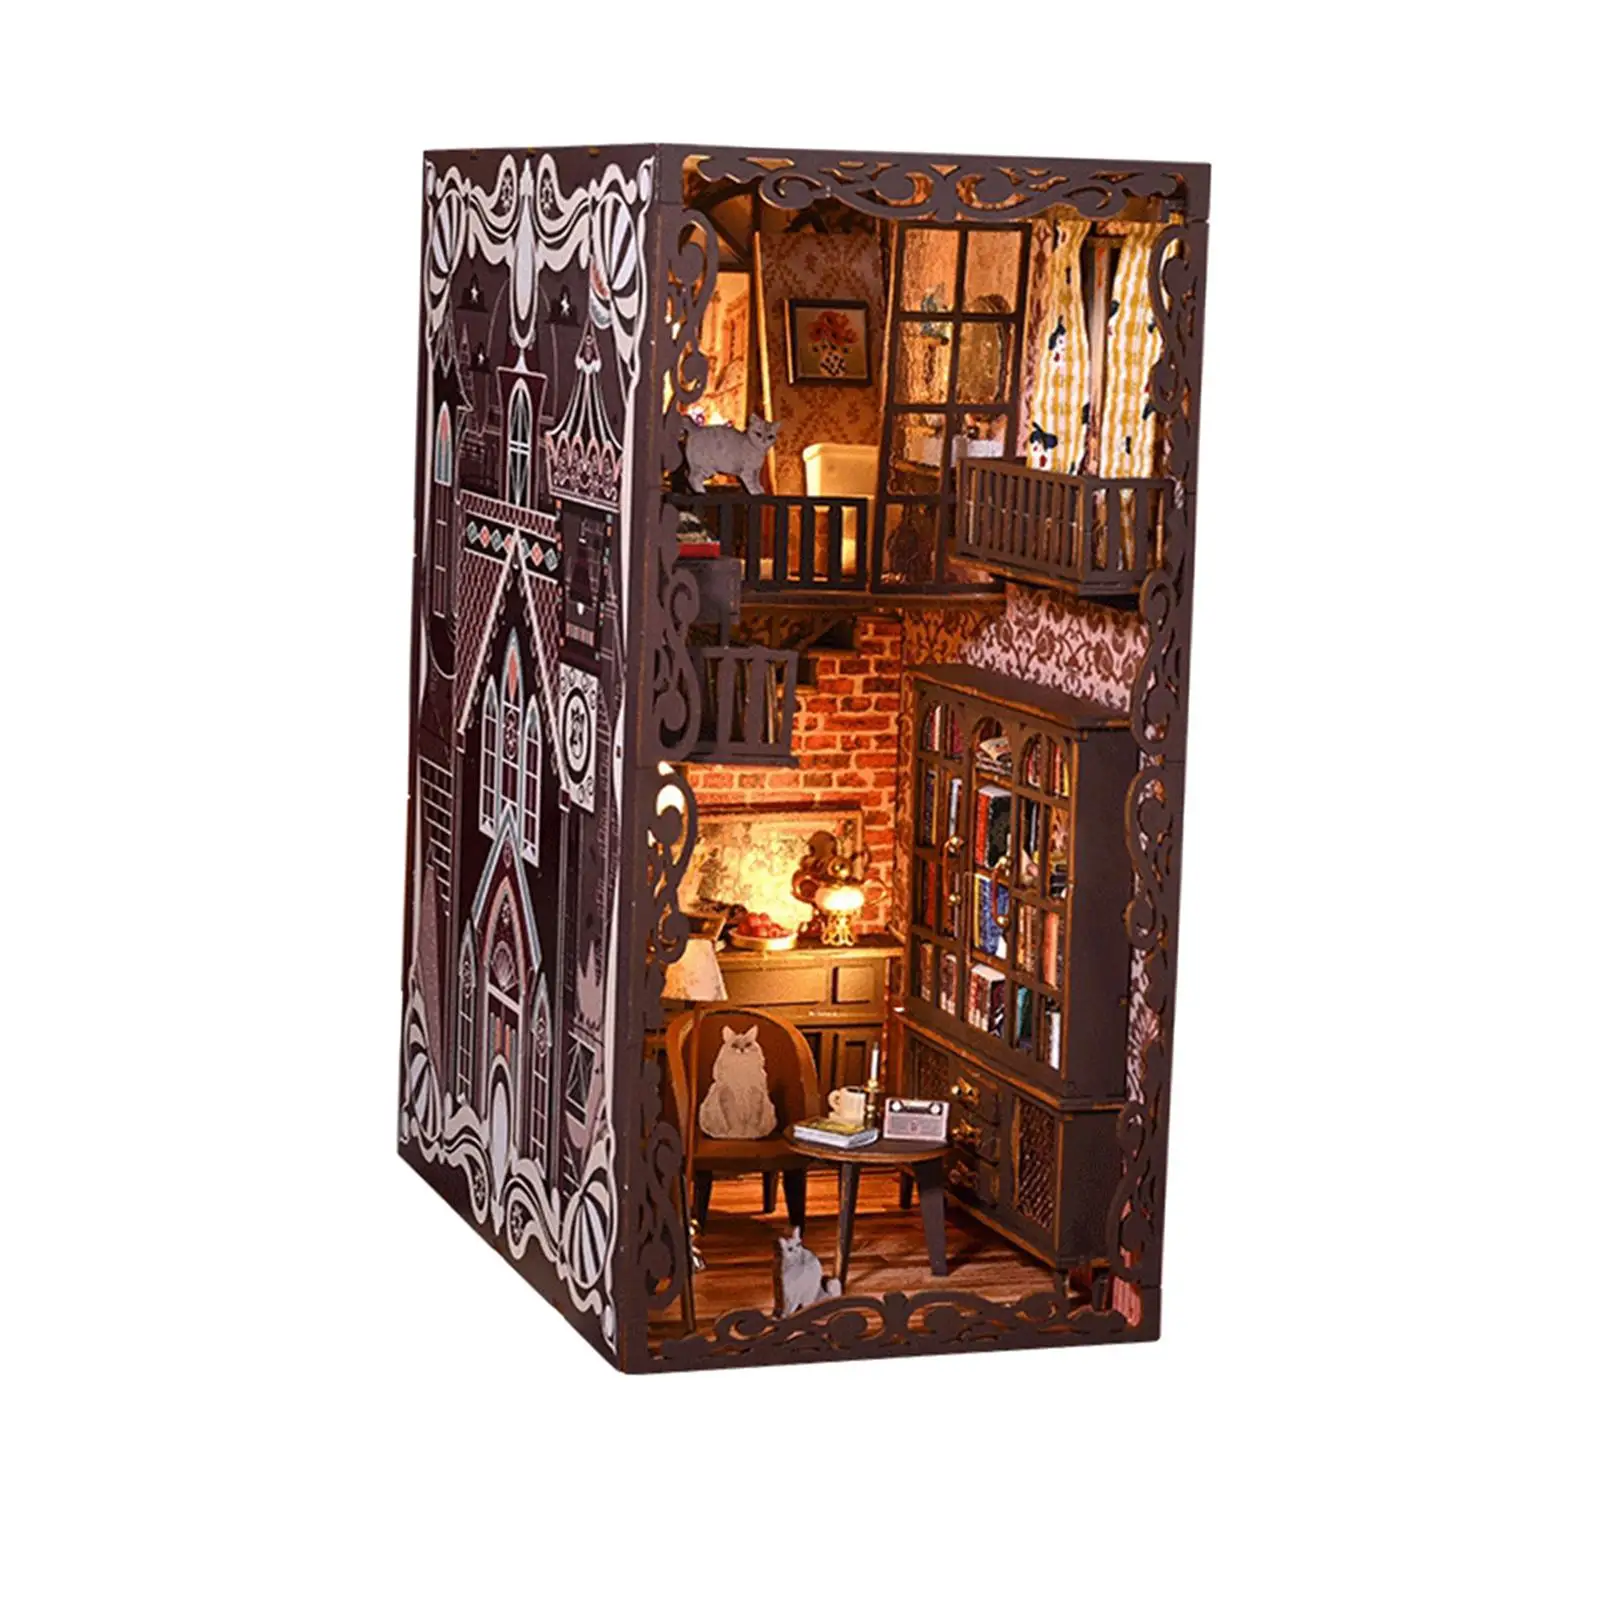 DIY Booknook Kits with LED Light Miniature House for Adults Children Teens